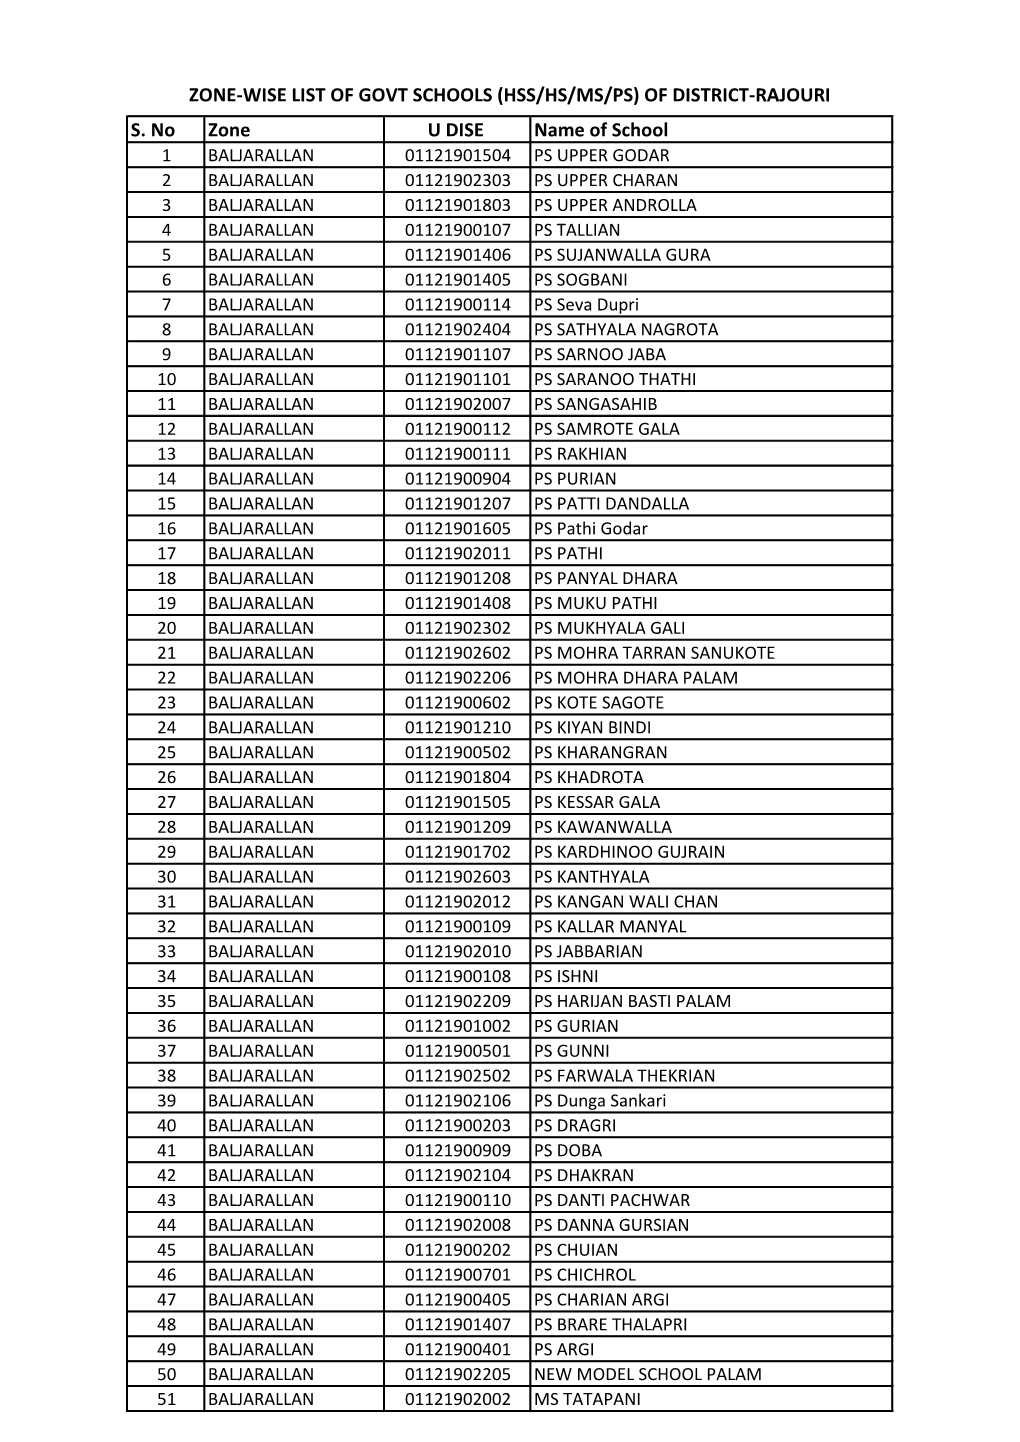 Zone-Wise List of Govt Schools (Hss/Hs/Ms/Ps) of District-Rajouri S